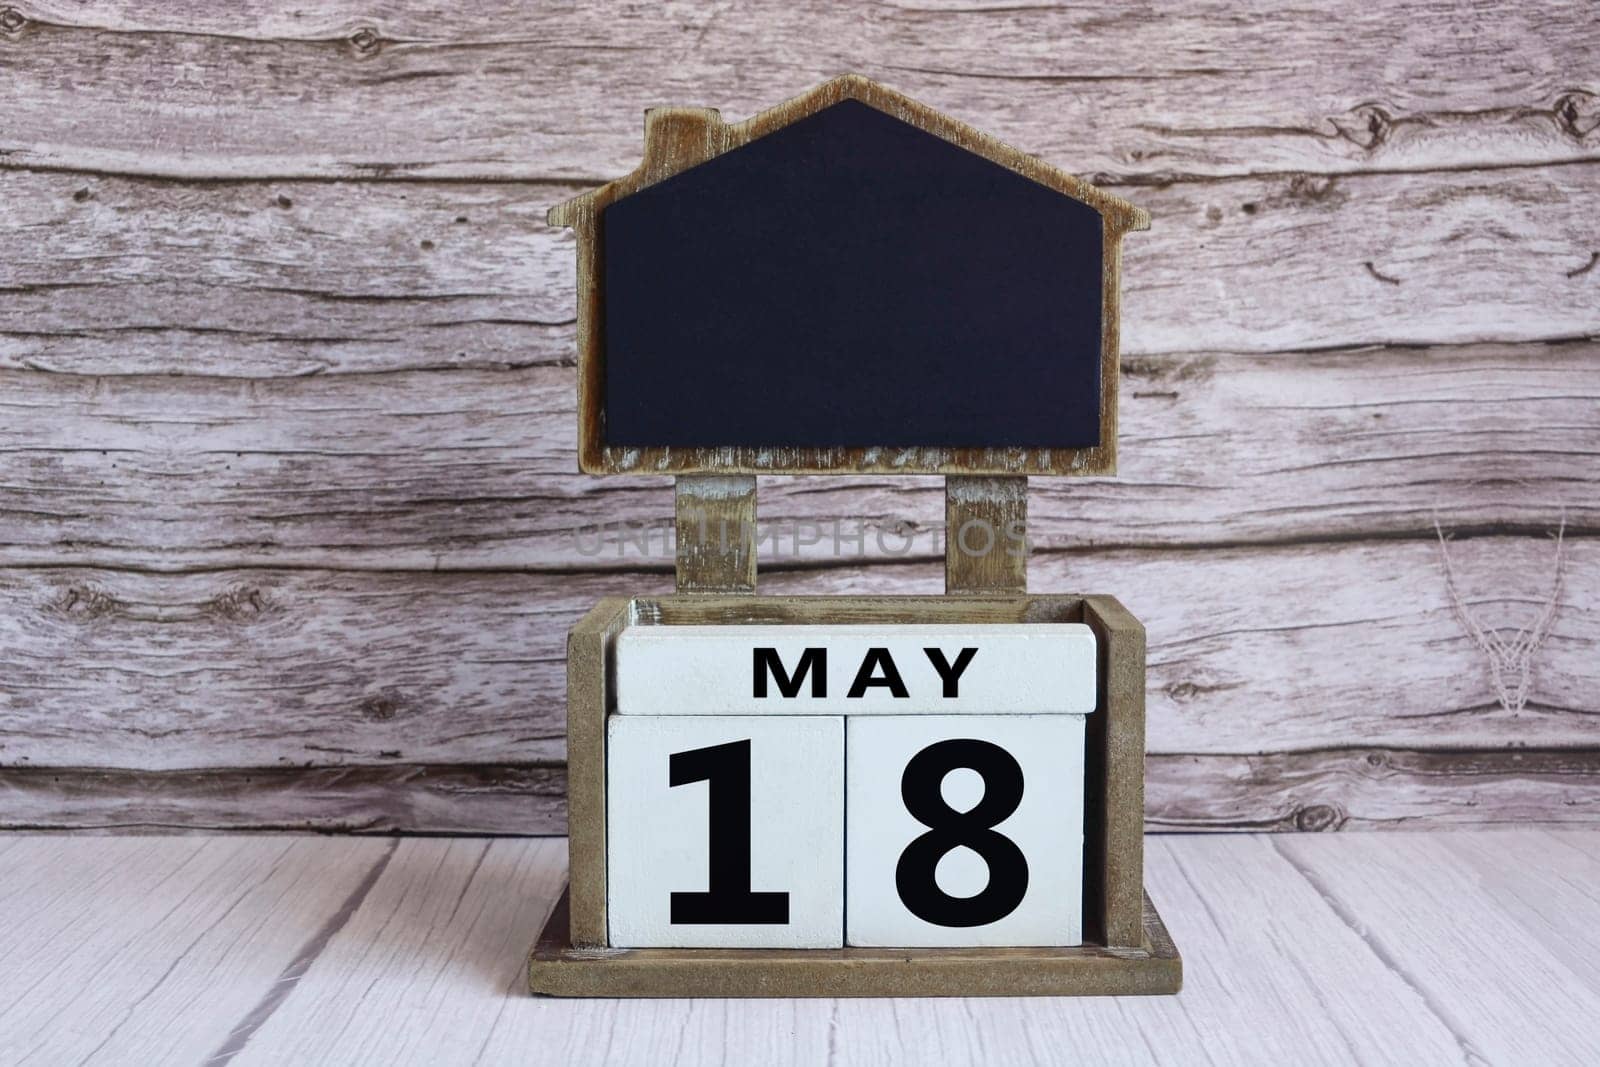 Chalkboard with May 18 calendar date on white cube block on wooden table.